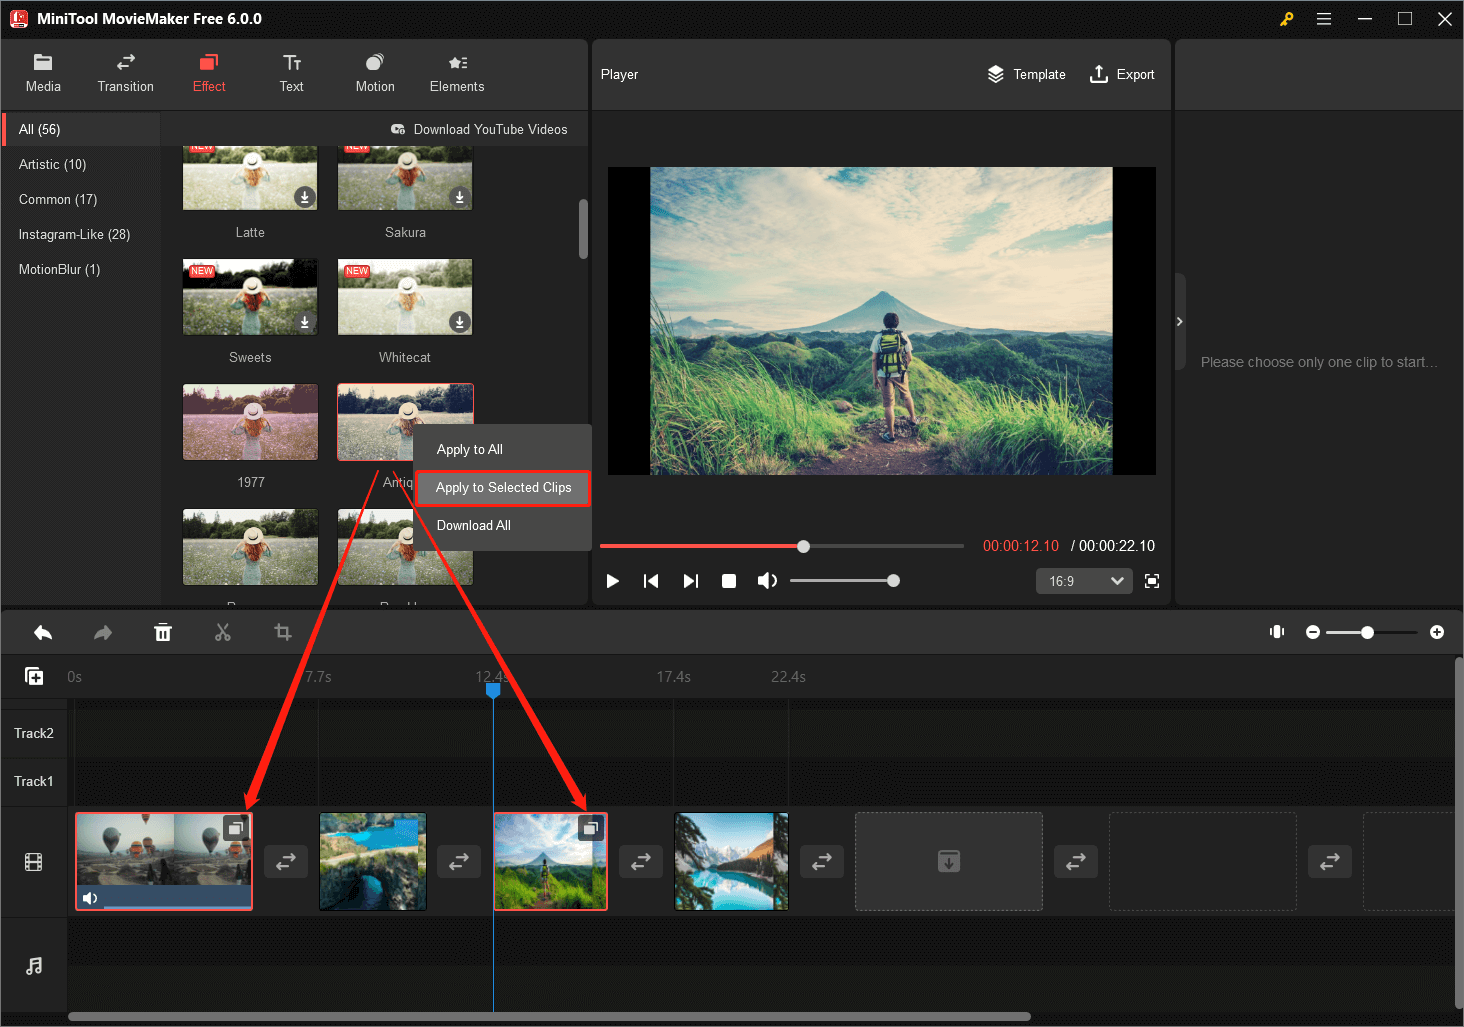 apply the same effect to selected clips